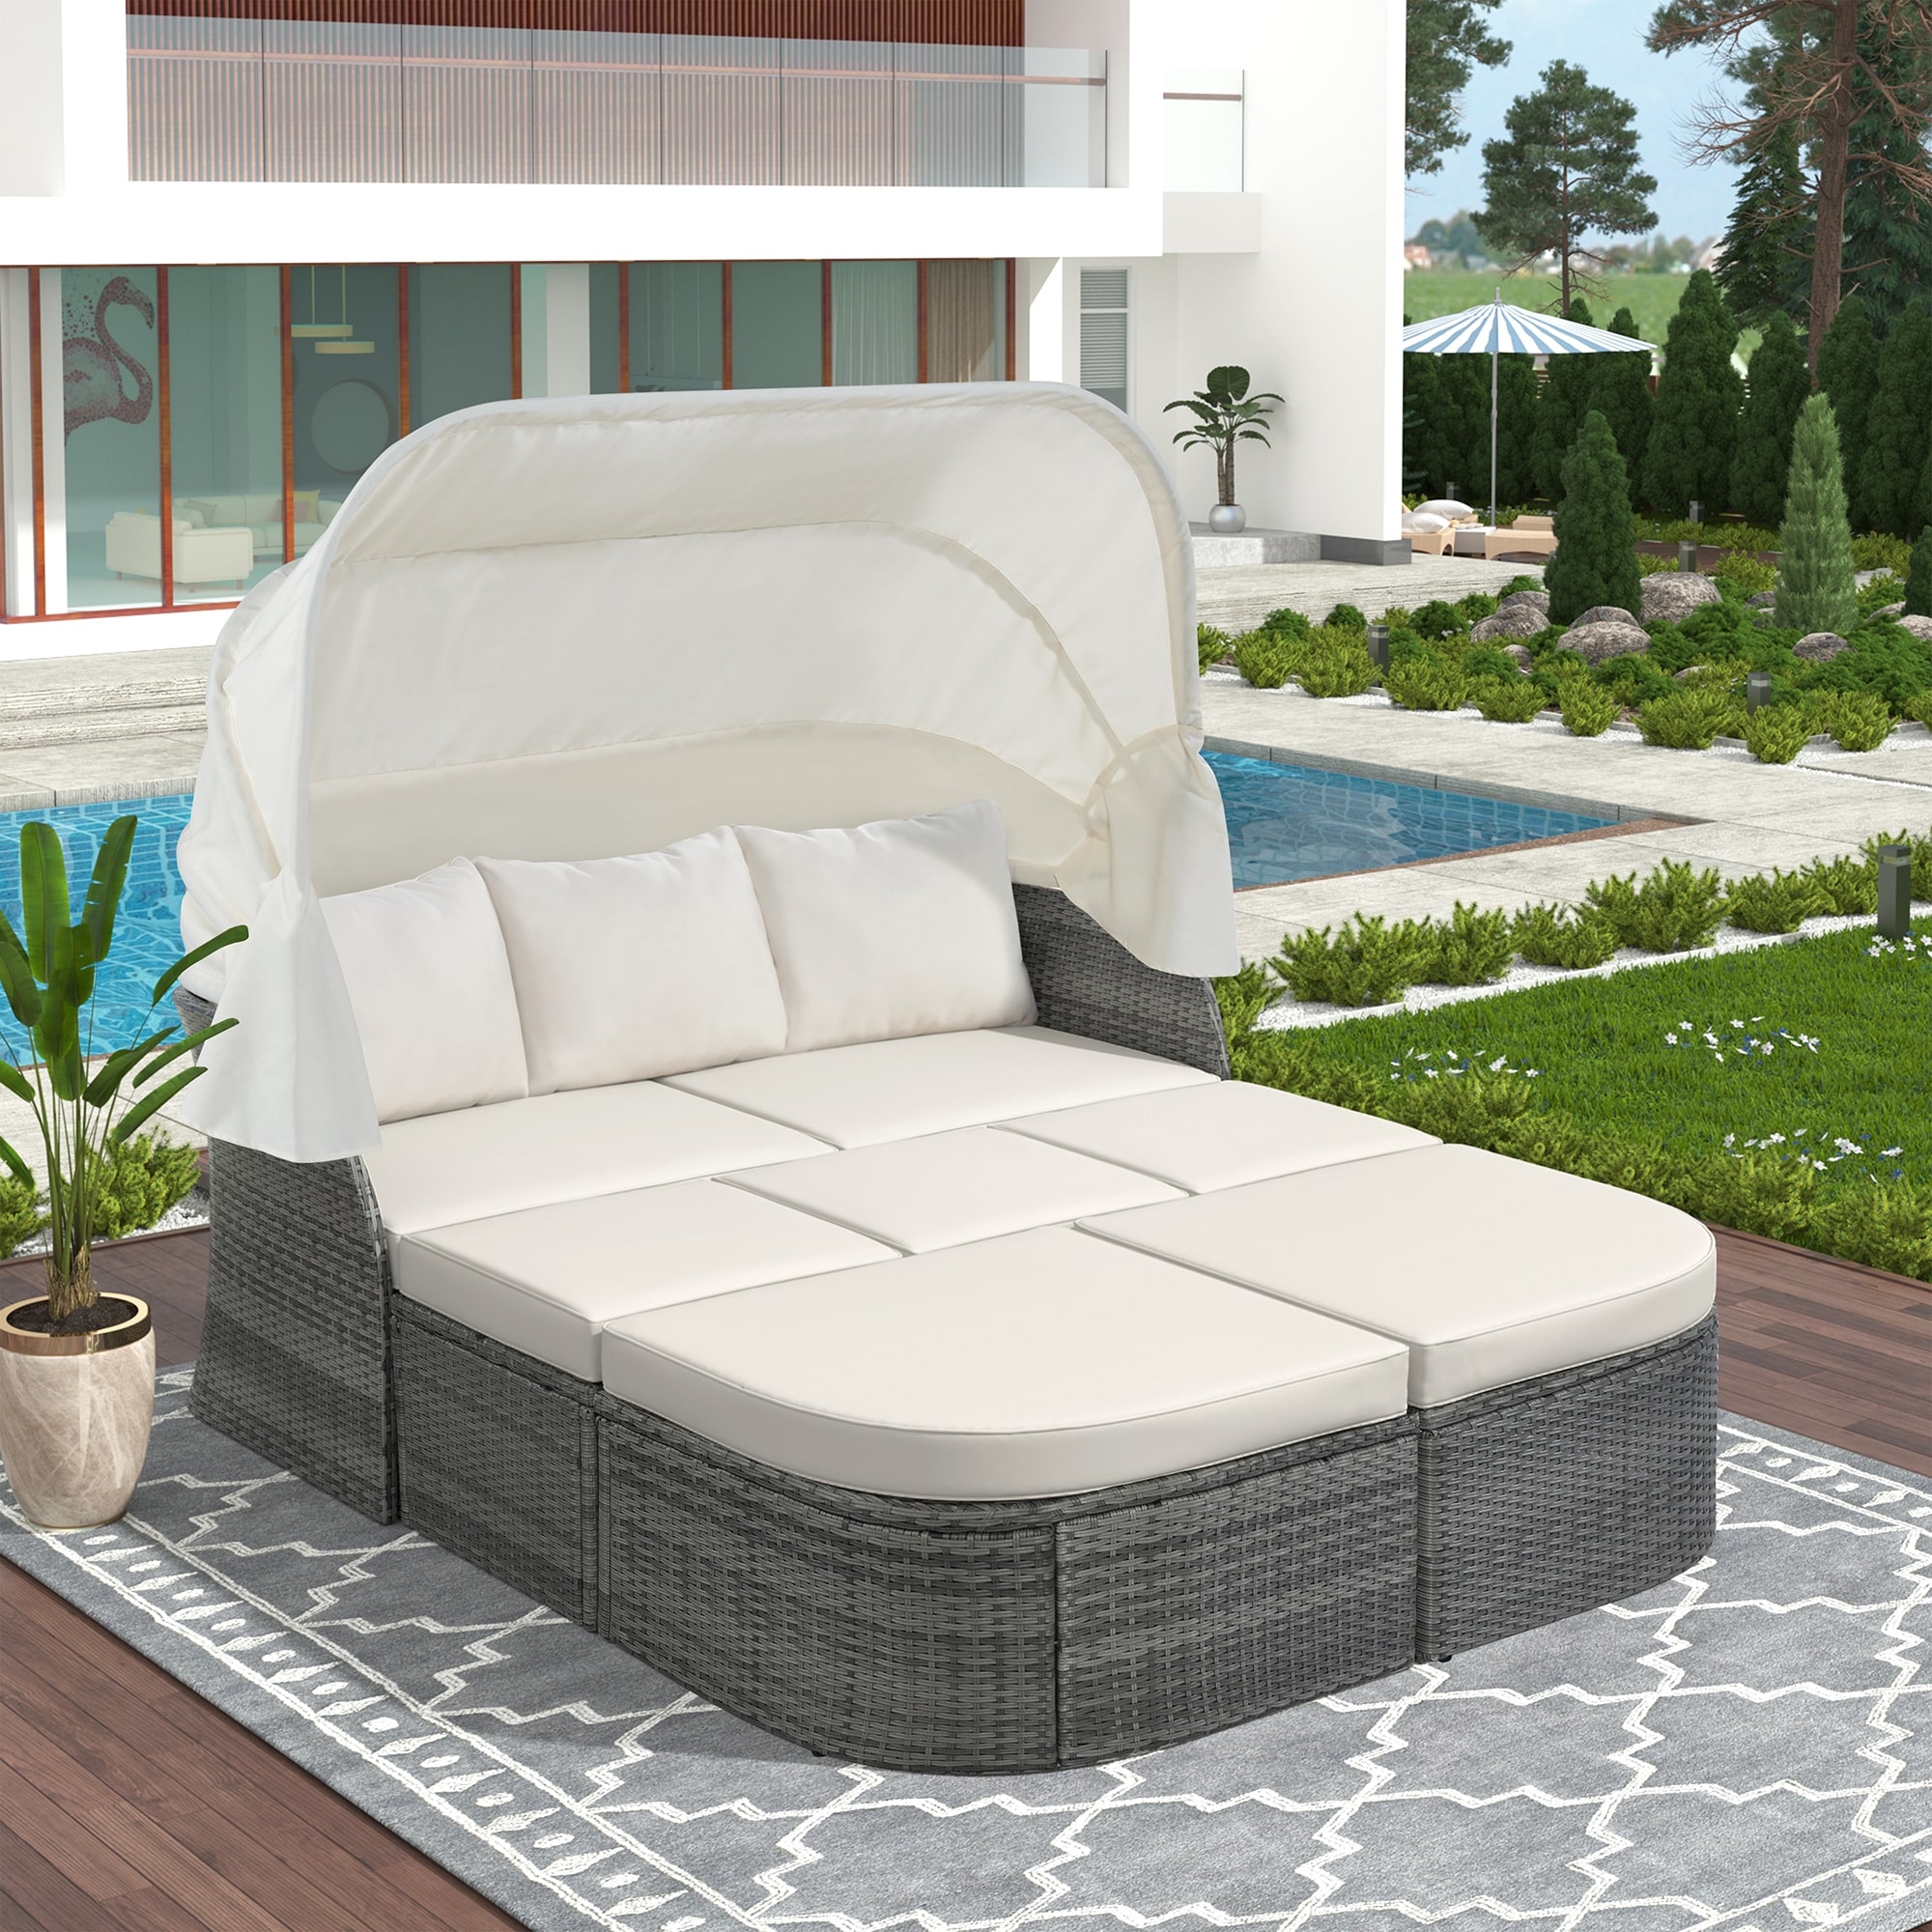 Global Pronex Outdoor Patio Furniture Set Daybed Sunbed With Retractable Canopy Conversation Set Wicker Furniture Sofa Set